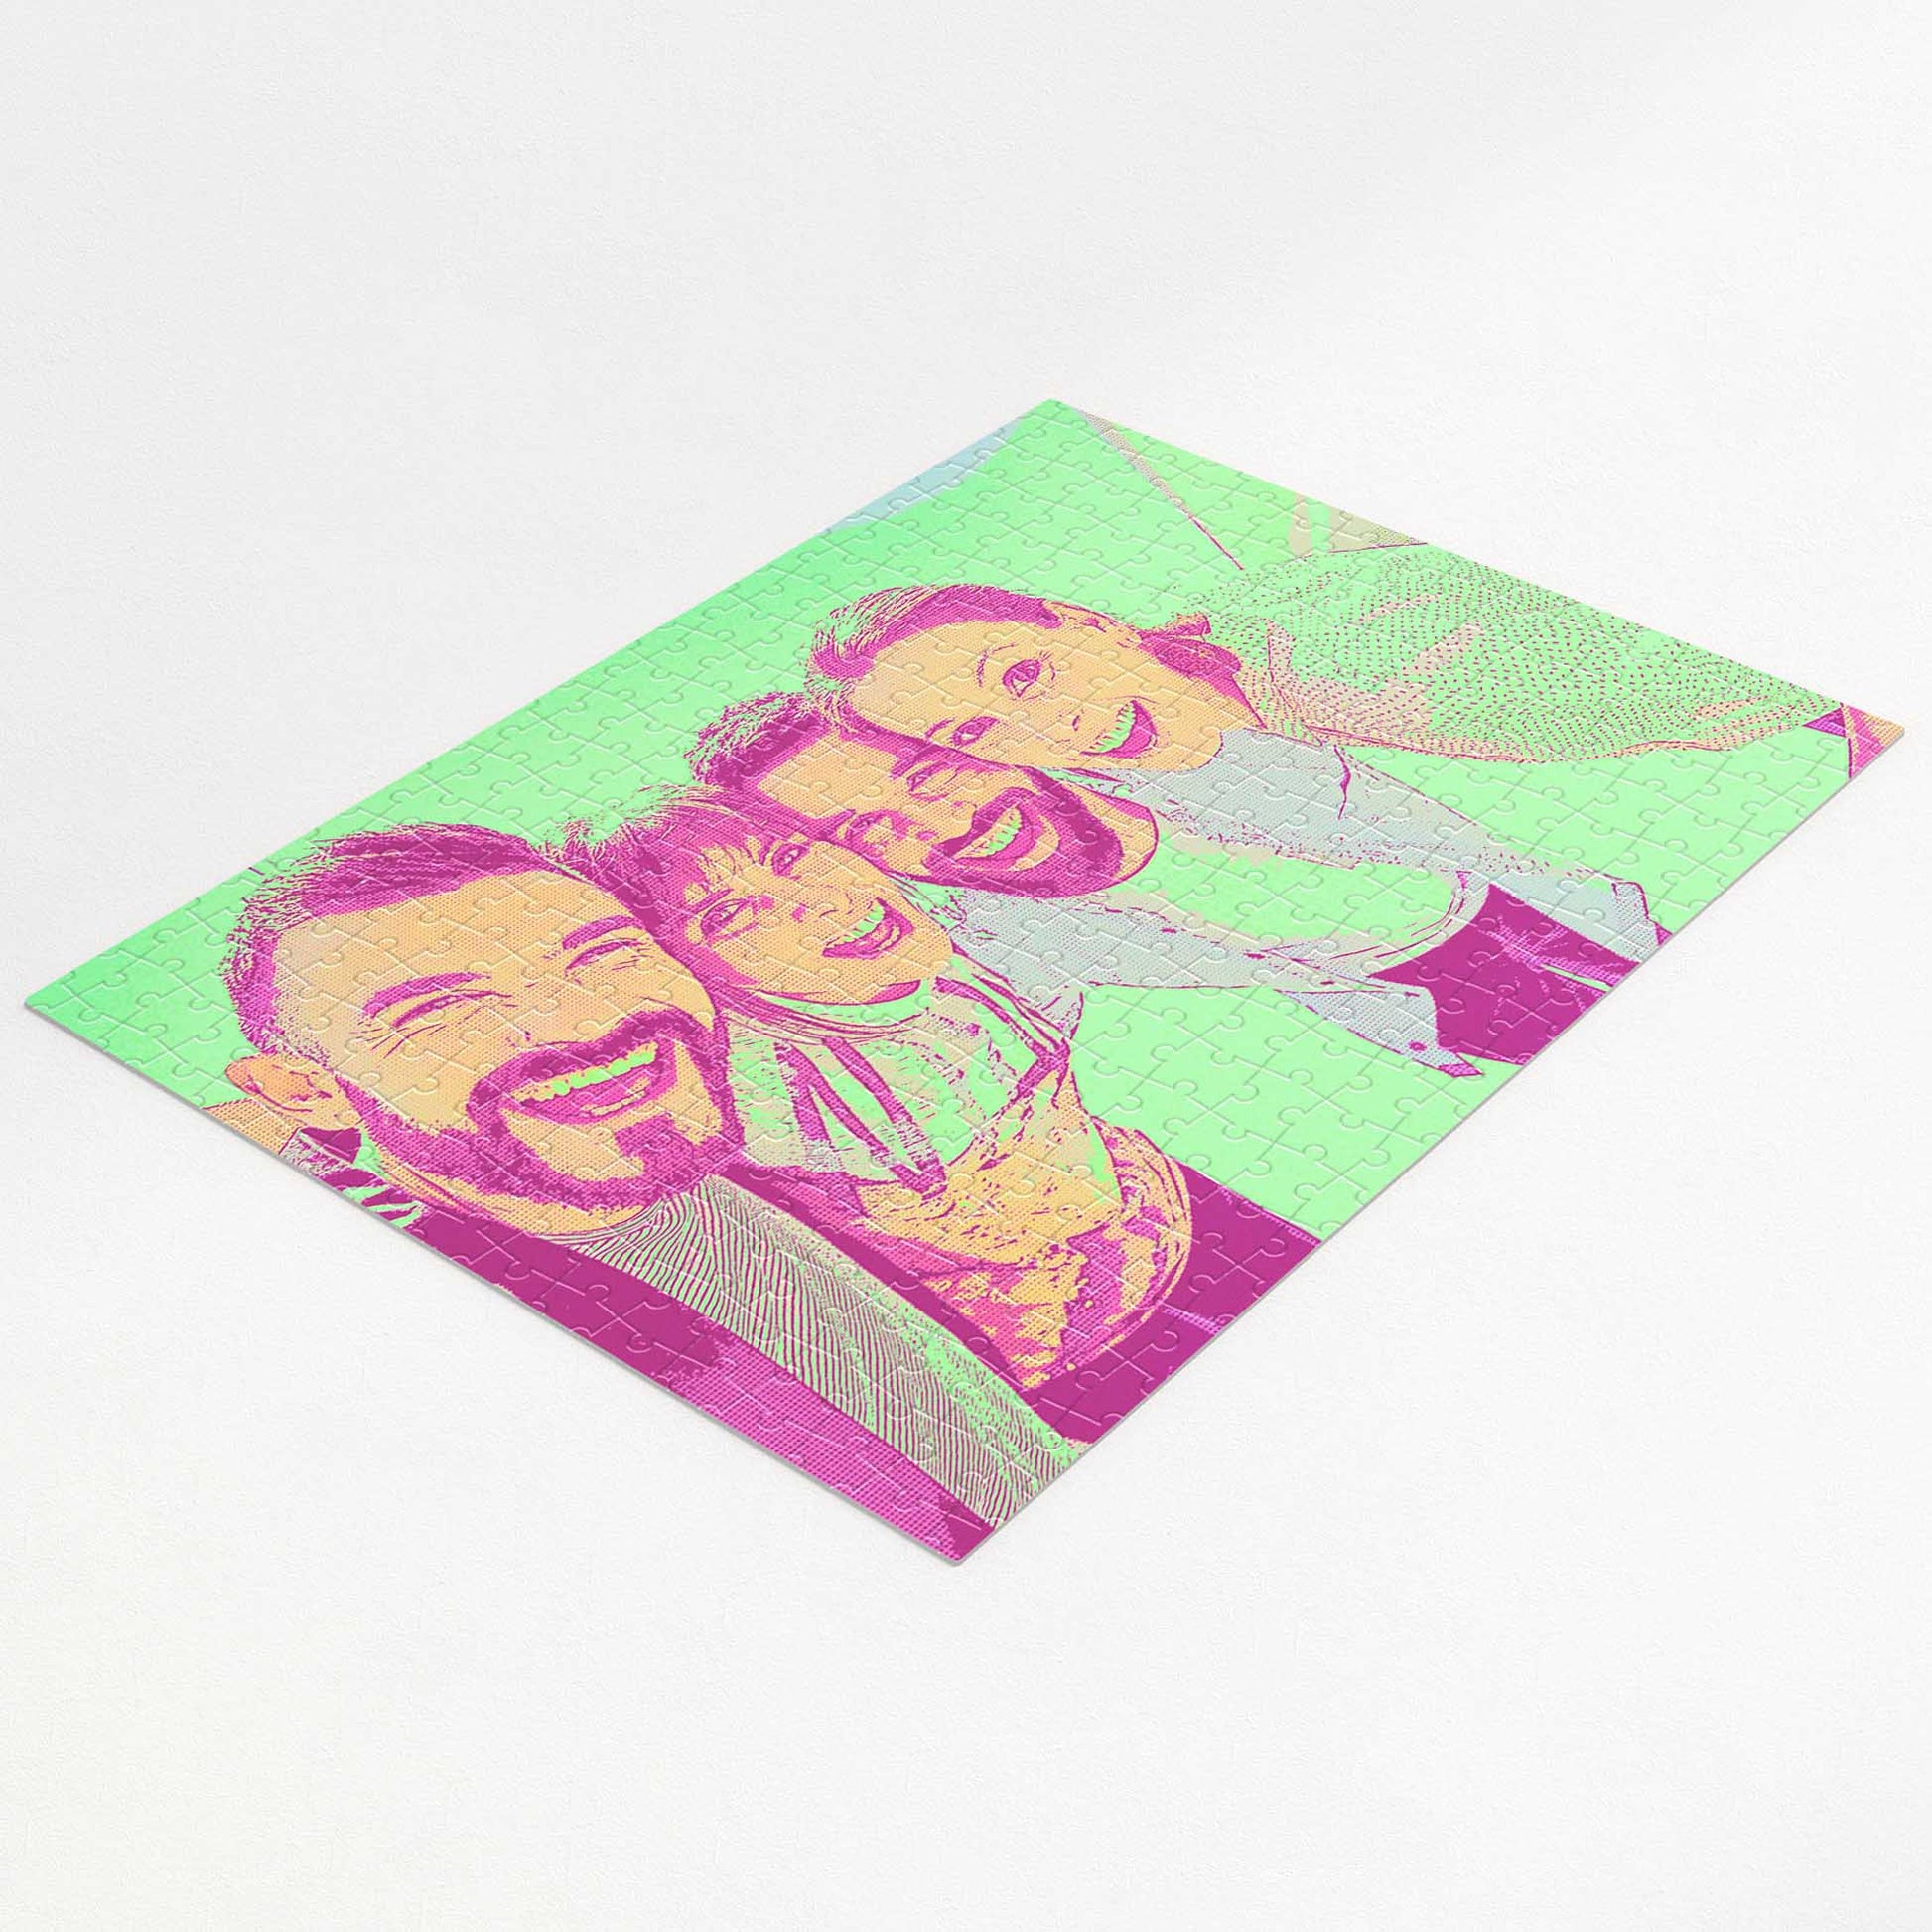 Surprise your loved ones with a Personalised Green & Pink Pop Art Jigsaw Puzzle. Cartoon from photo, pop art style, featuring vibrant green and pink colors. Handmade and dye sublimation print make it a unique and original gift 